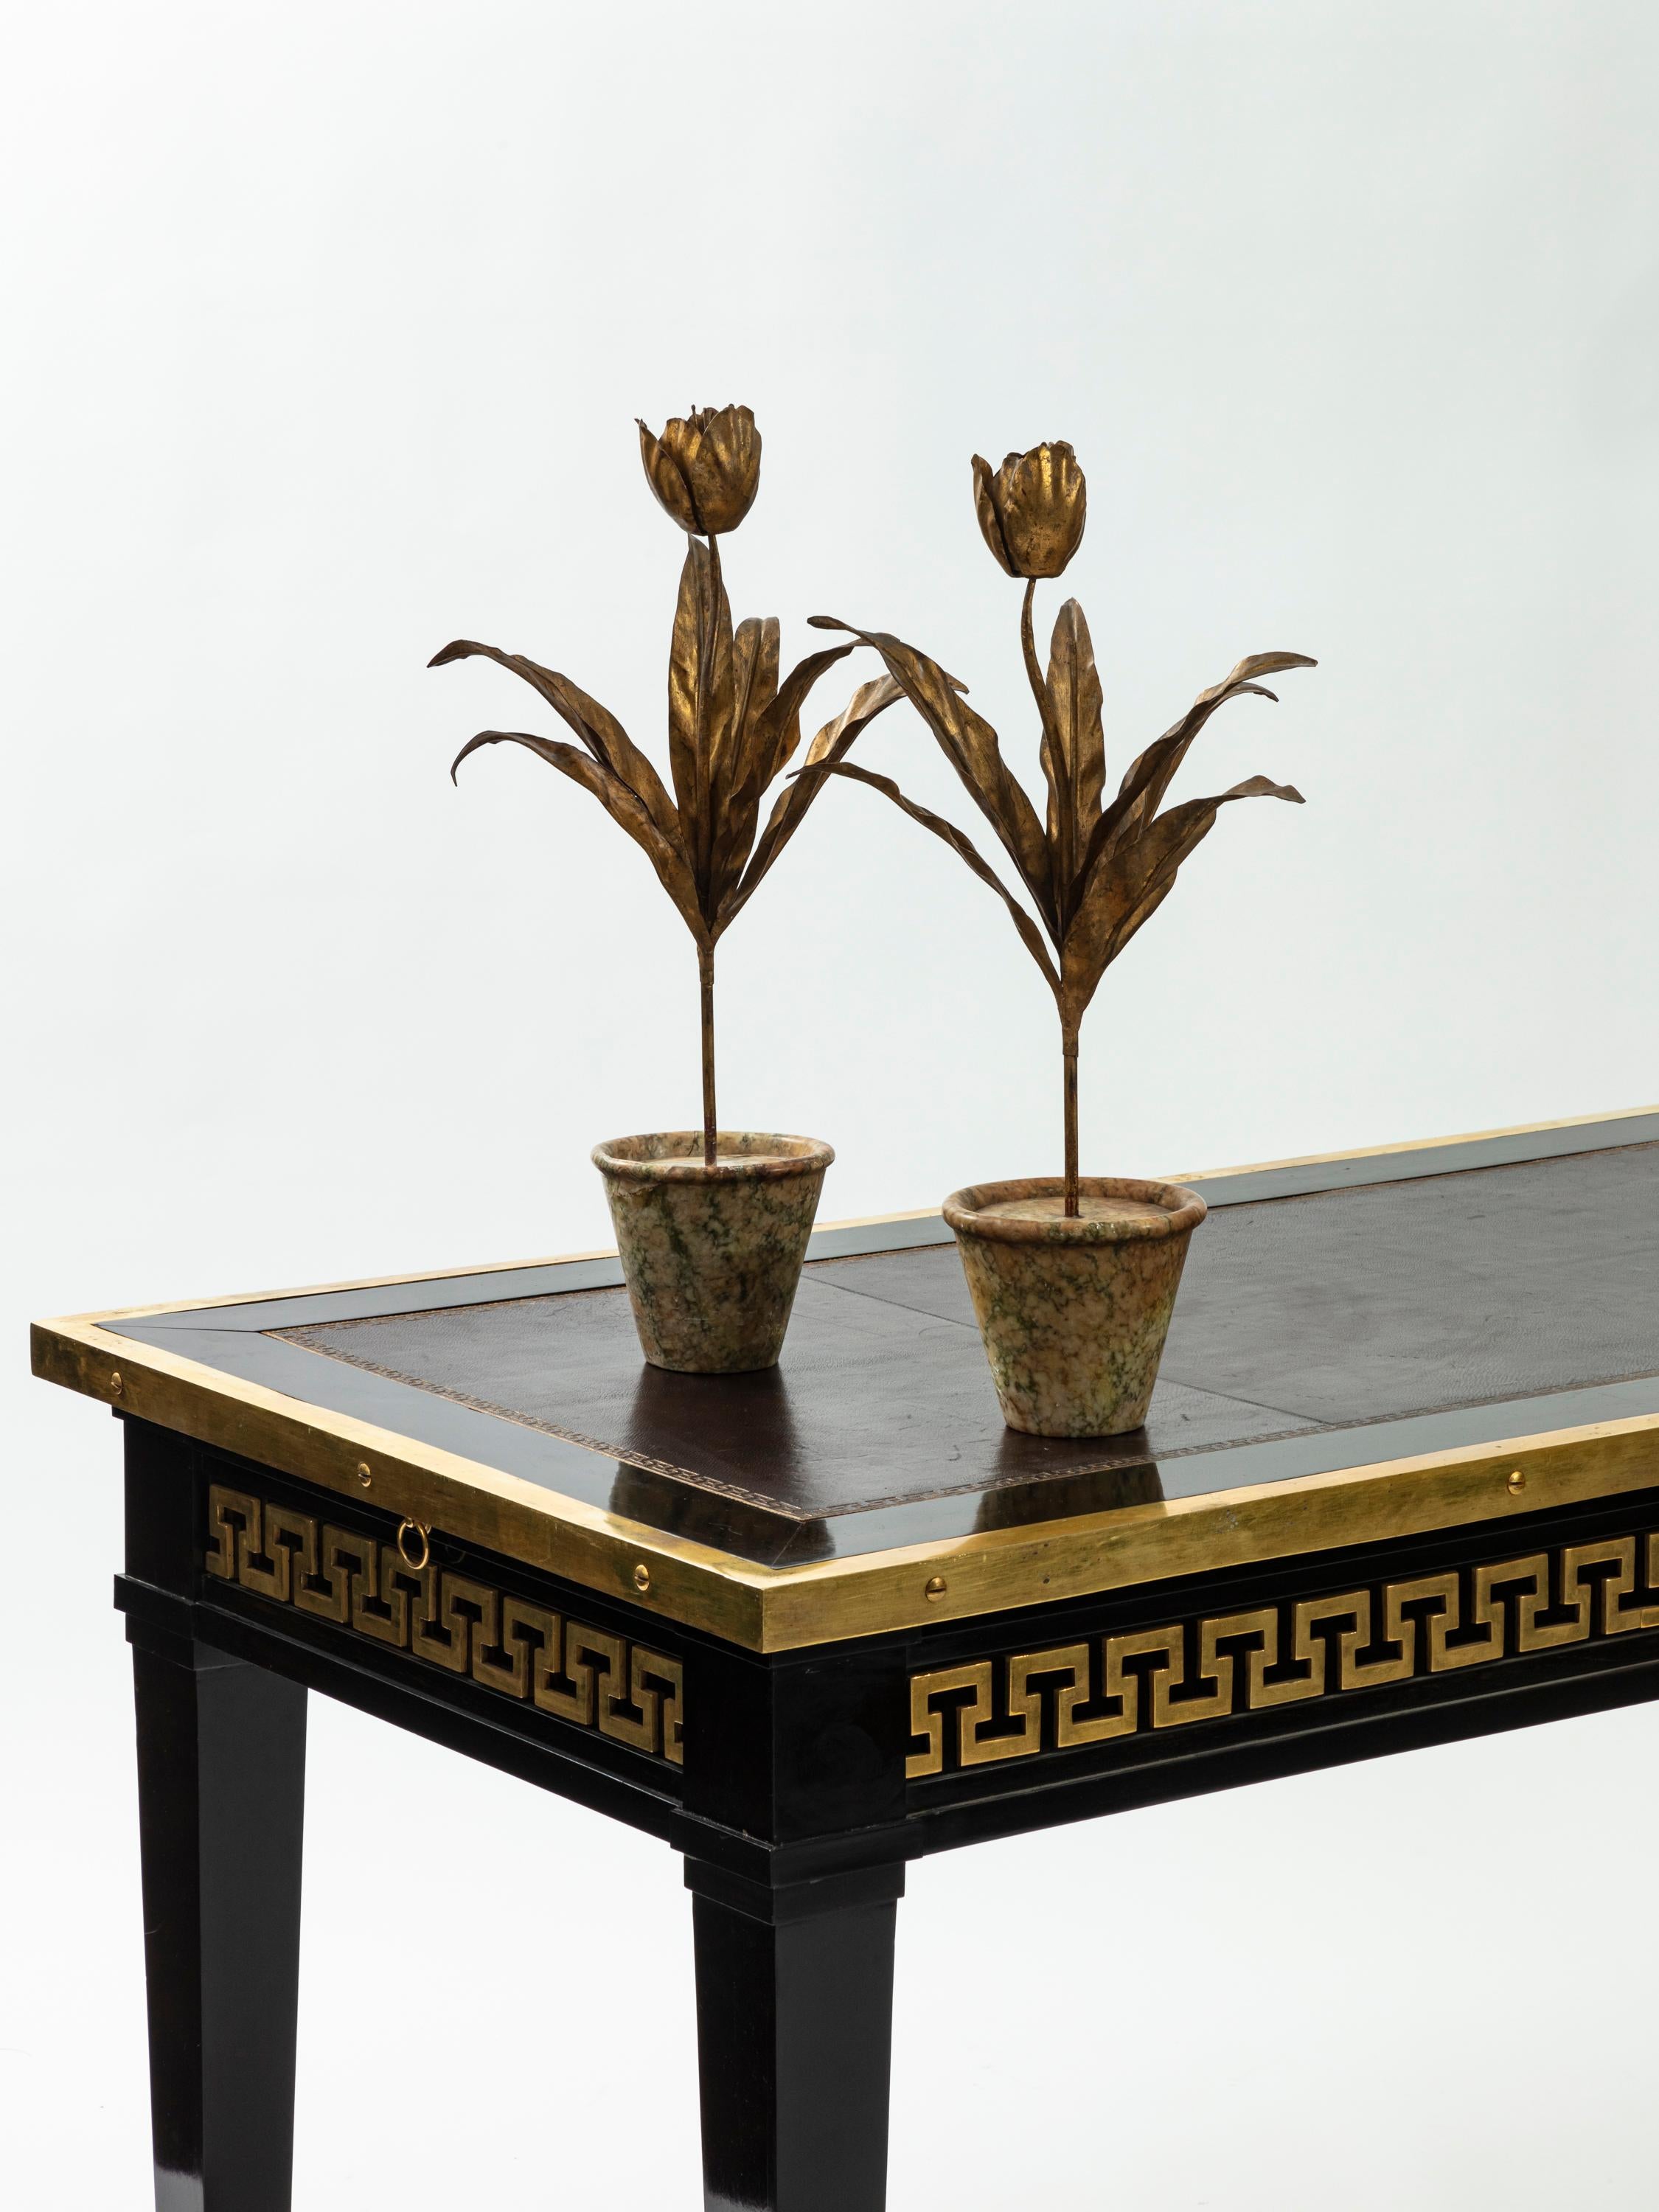 Pair of 1940s gilded metal tulips on beige yellow and olive green marble planters.